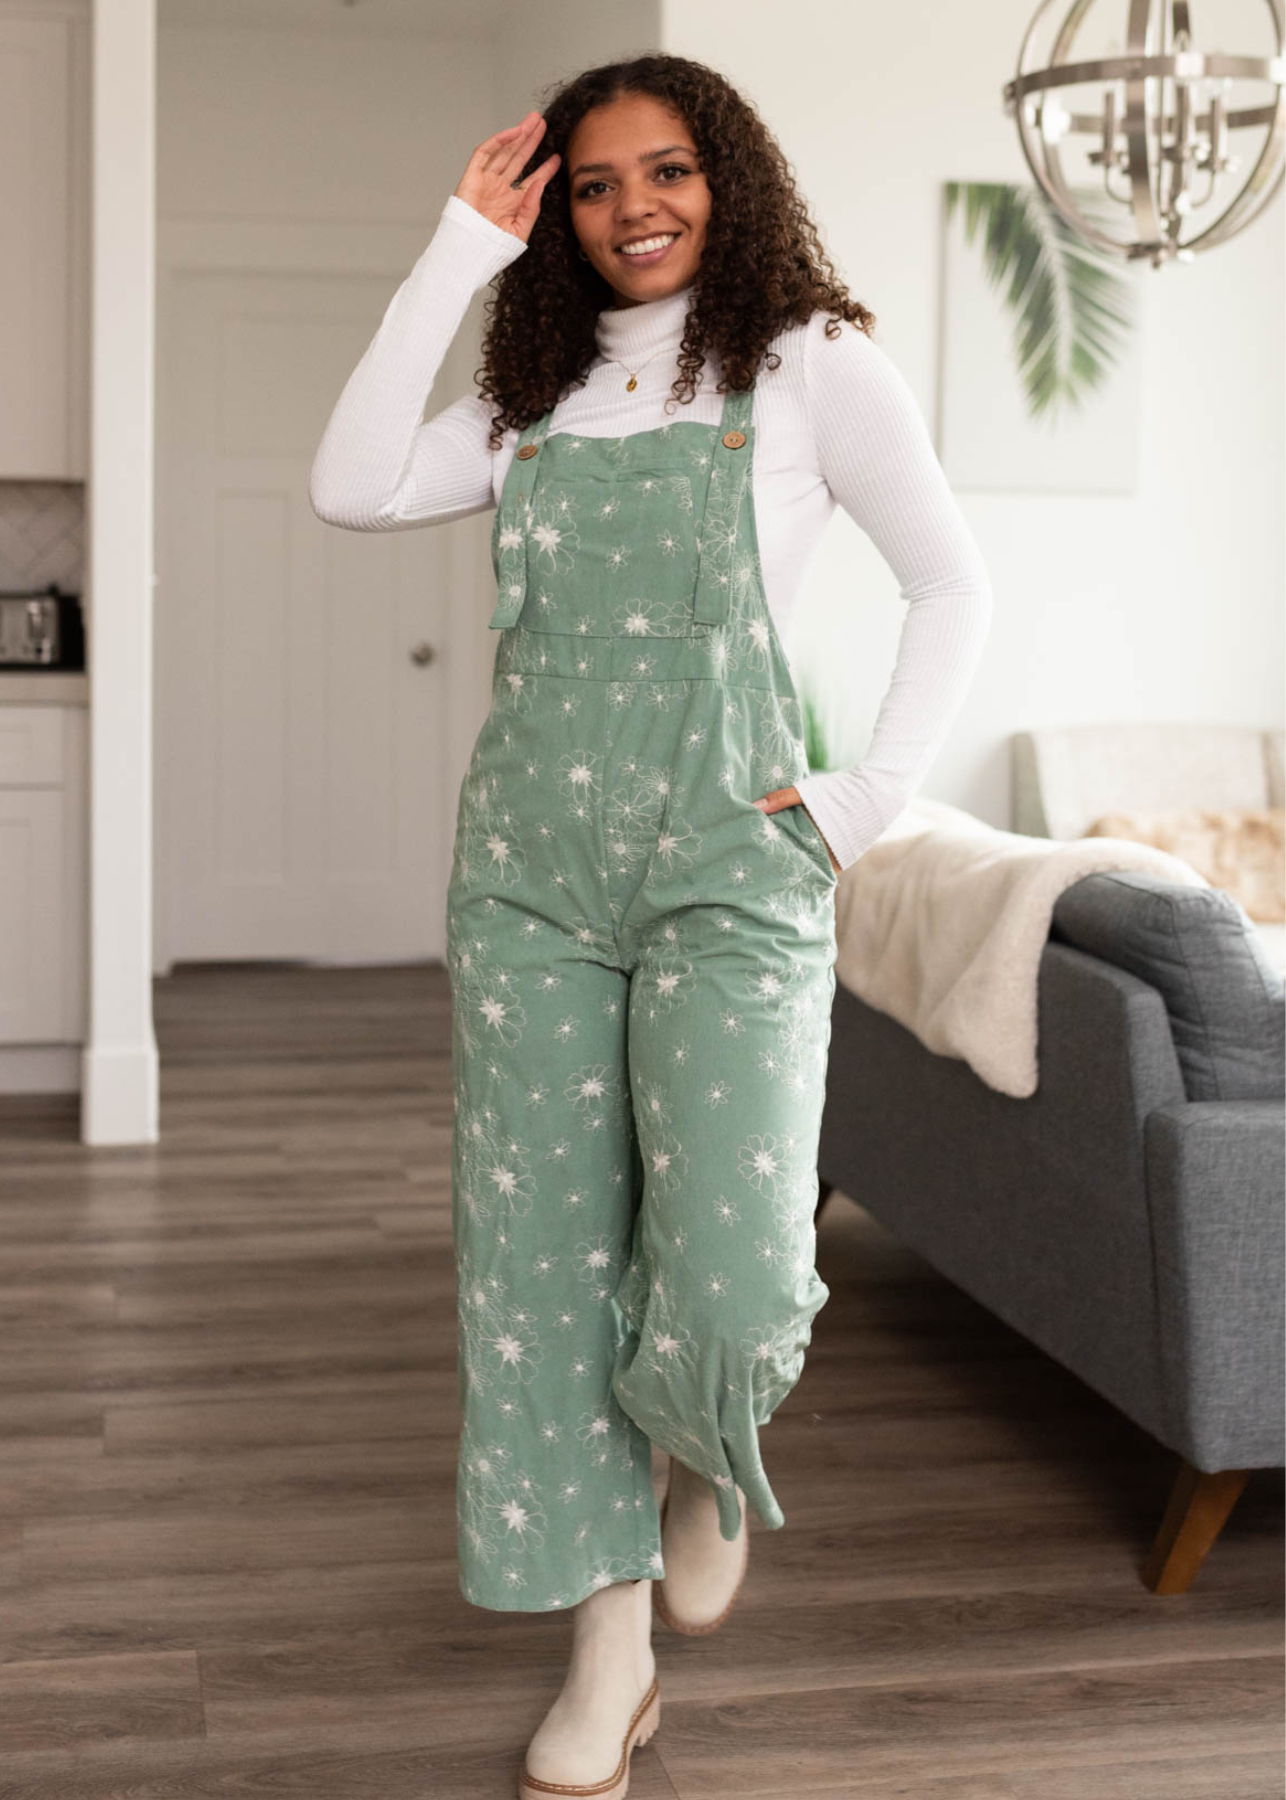 Green embroidered overalls